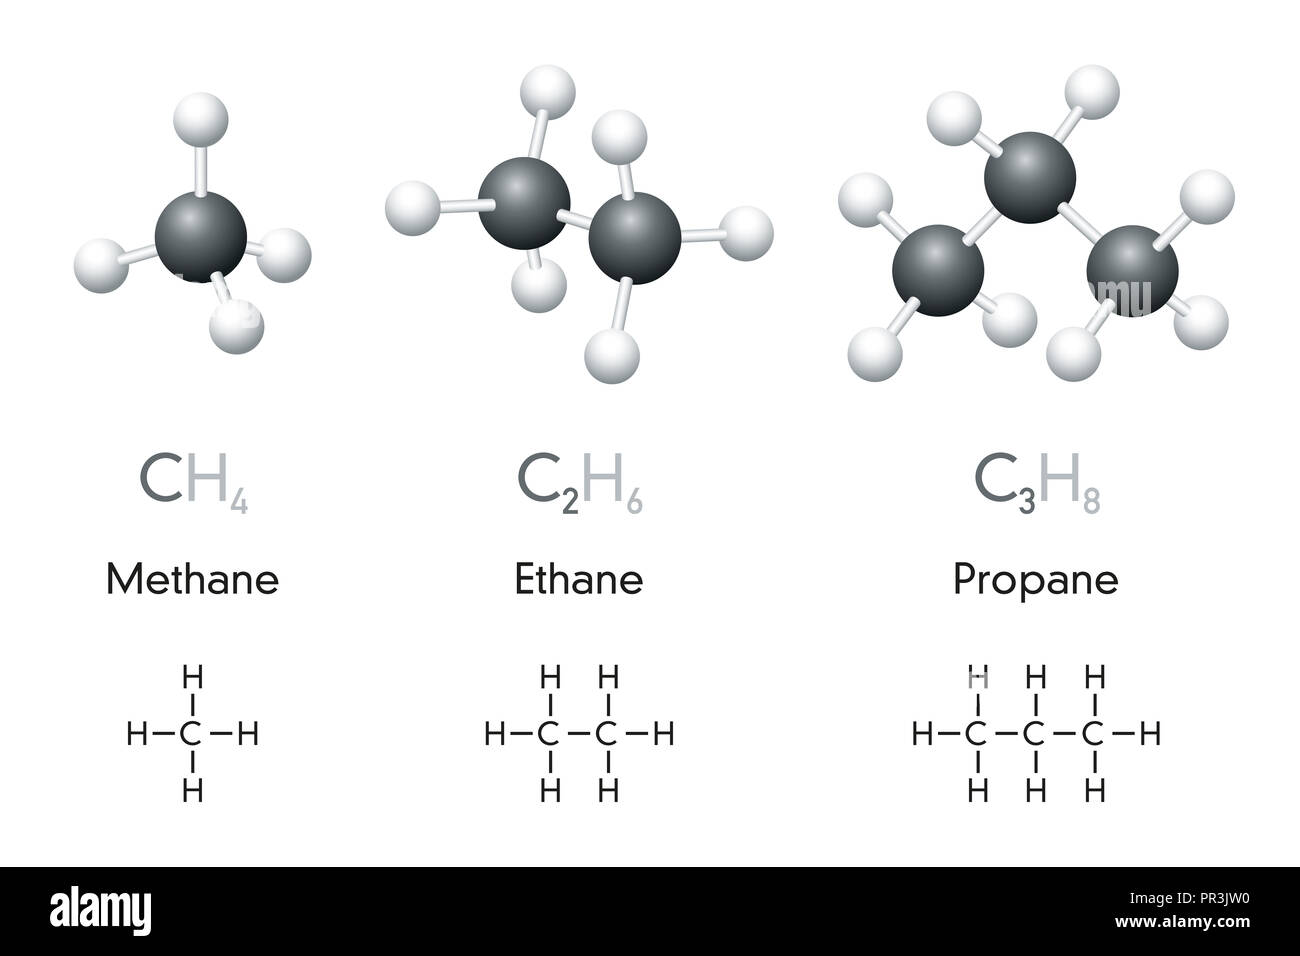 Methane, ethane, propane. Molecule ball-and-stick models and chemical formulas. Organic chemical compounds. Natural gas. Geometric structure, formula. Stock Photo